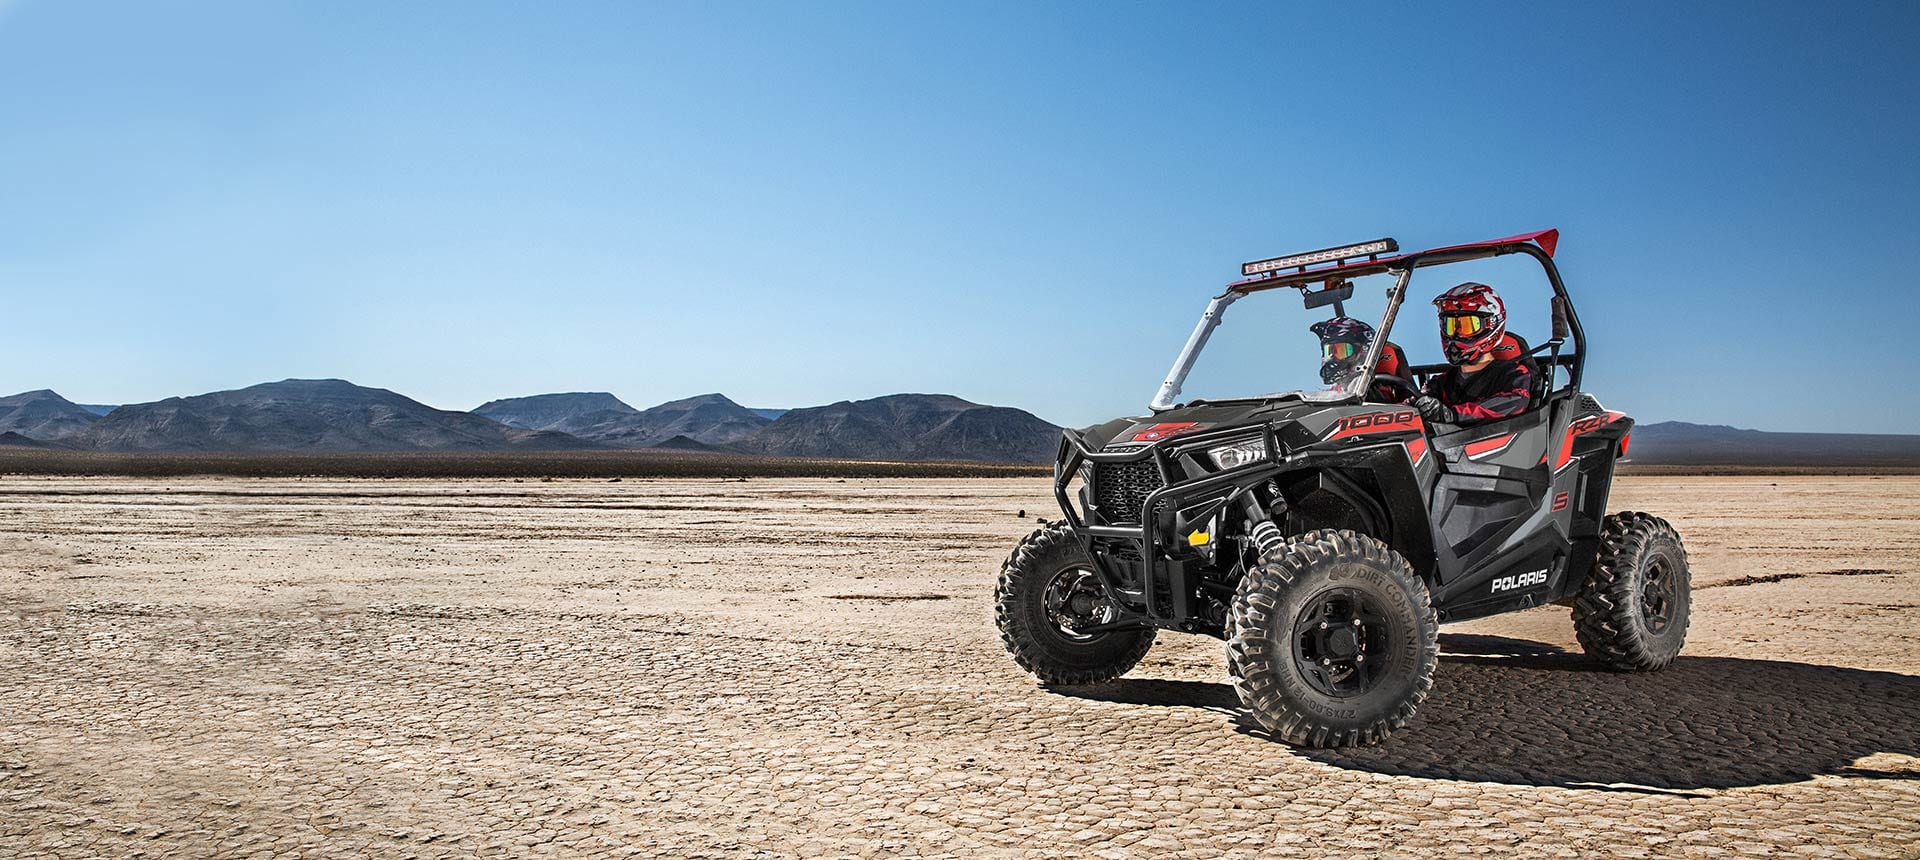 RZR S 1000 OFFROAD VEHICLE